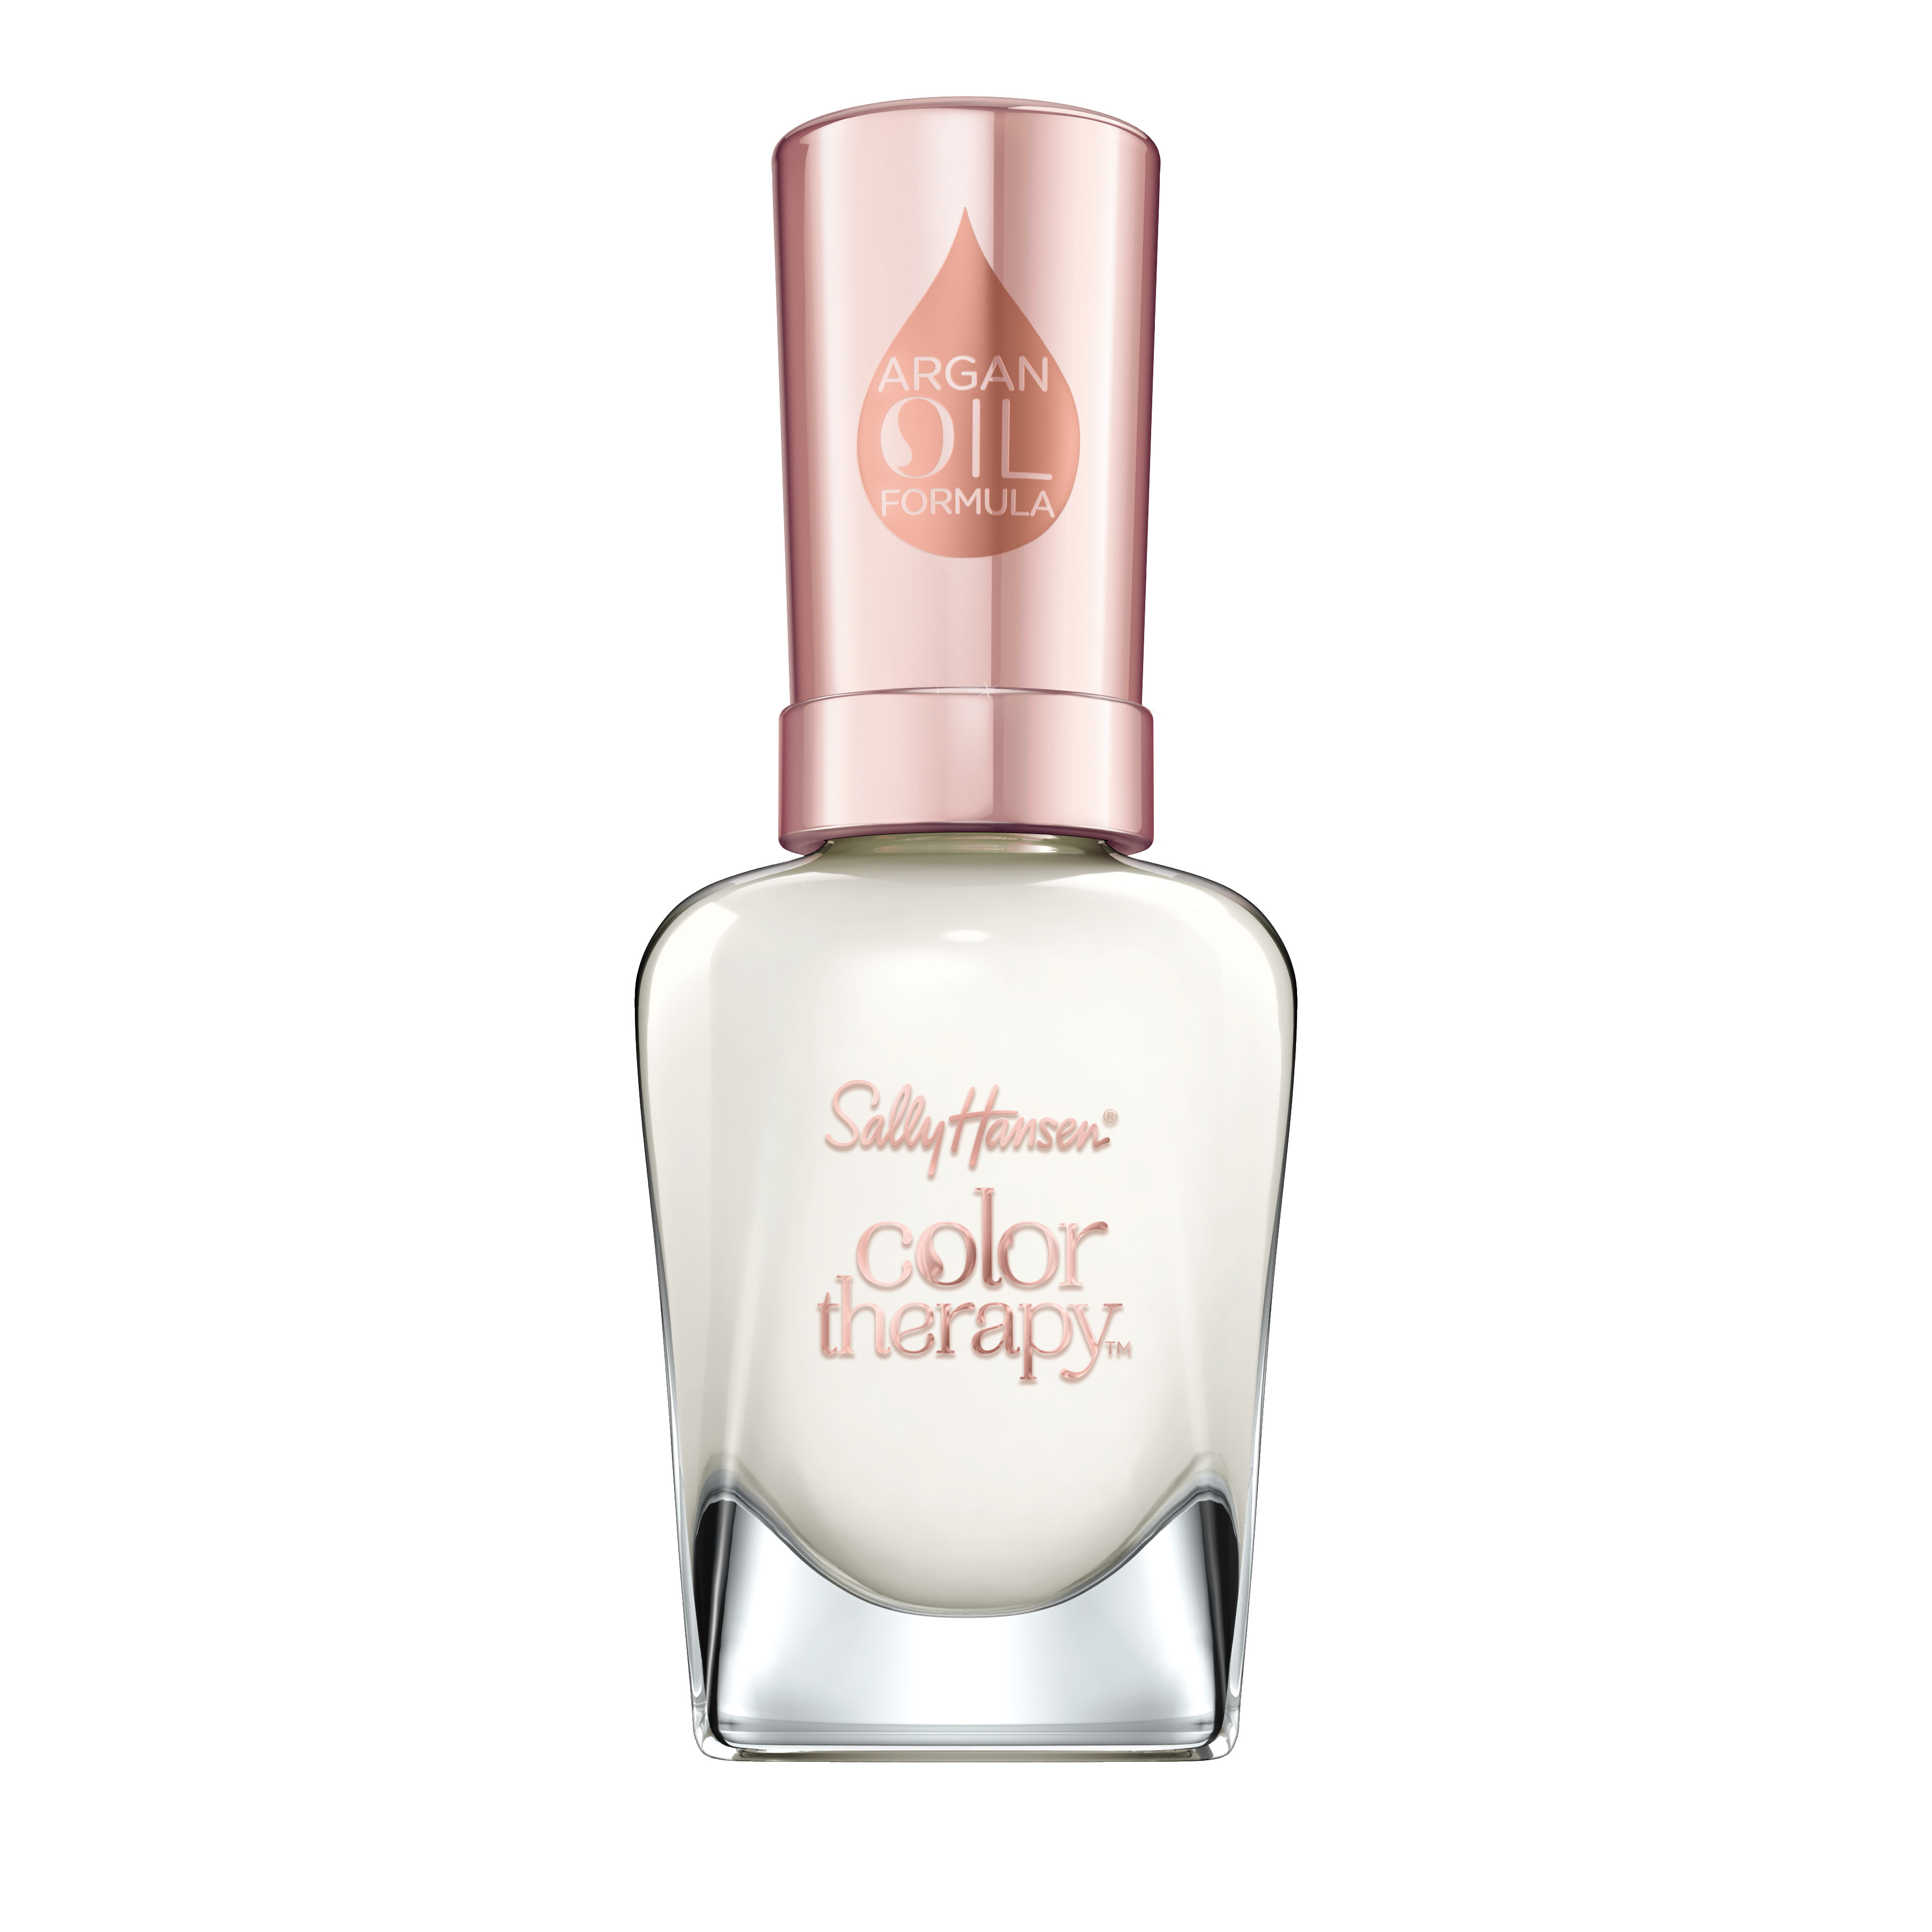 Sally Hansen Color Therapy Nail Polish, Well, Well, Well, 0.5 oz, Restorative, Argan Oil Formula - image 1 of 15